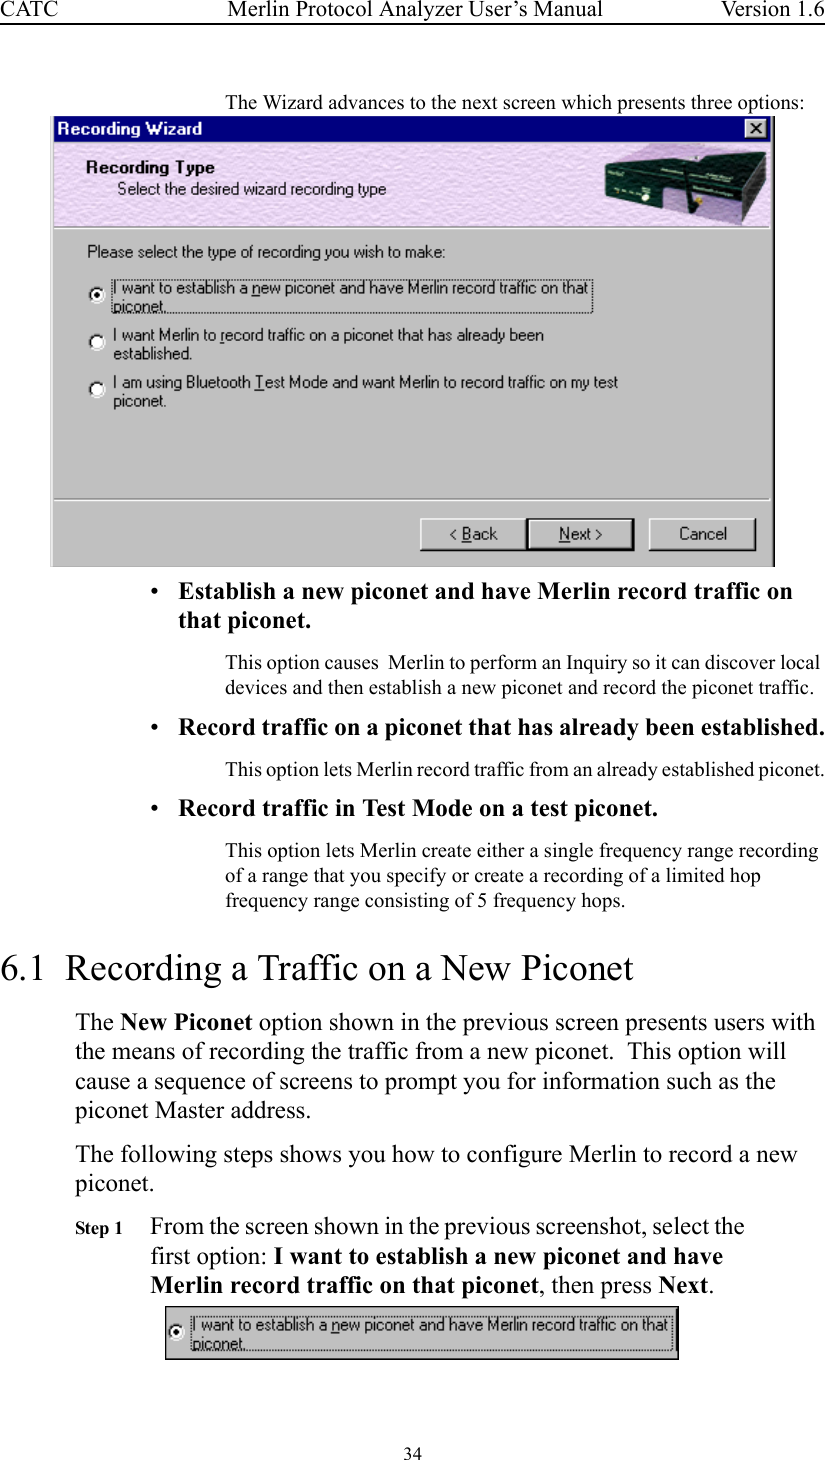 34 Merlin Protocol Analyzer User’s ManualCATC Version 1.6The Wizard advances to the next screen which presents three options:•Establish a new piconet and have Merlin record traffic on that piconet.This option causes  Merlin to perform an Inquiry so it can discover local devices and then establish a new piconet and record the piconet traffic.•Record traffic on a piconet that has already been established.This option lets Merlin record traffic from an already established piconet.•Record traffic in Test Mode on a test piconet.This option lets Merlin create either a single frequency range recording of a range that you specify or create a recording of a limited hop frequency range consisting of 5 frequency hops.6.1  Recording a Traffic on a New PiconetThe New Piconet option shown in the previous screen presents users with the means of recording the traffic from a new piconet.  This option will cause a sequence of screens to prompt you for information such as the piconet Master address.  The following steps shows you how to configure Merlin to record a new piconet.Step 1 From the screen shown in the previous screenshot, select the first option: I want to establish a new piconet and have Merlin record traffic on that piconet, then press Next.